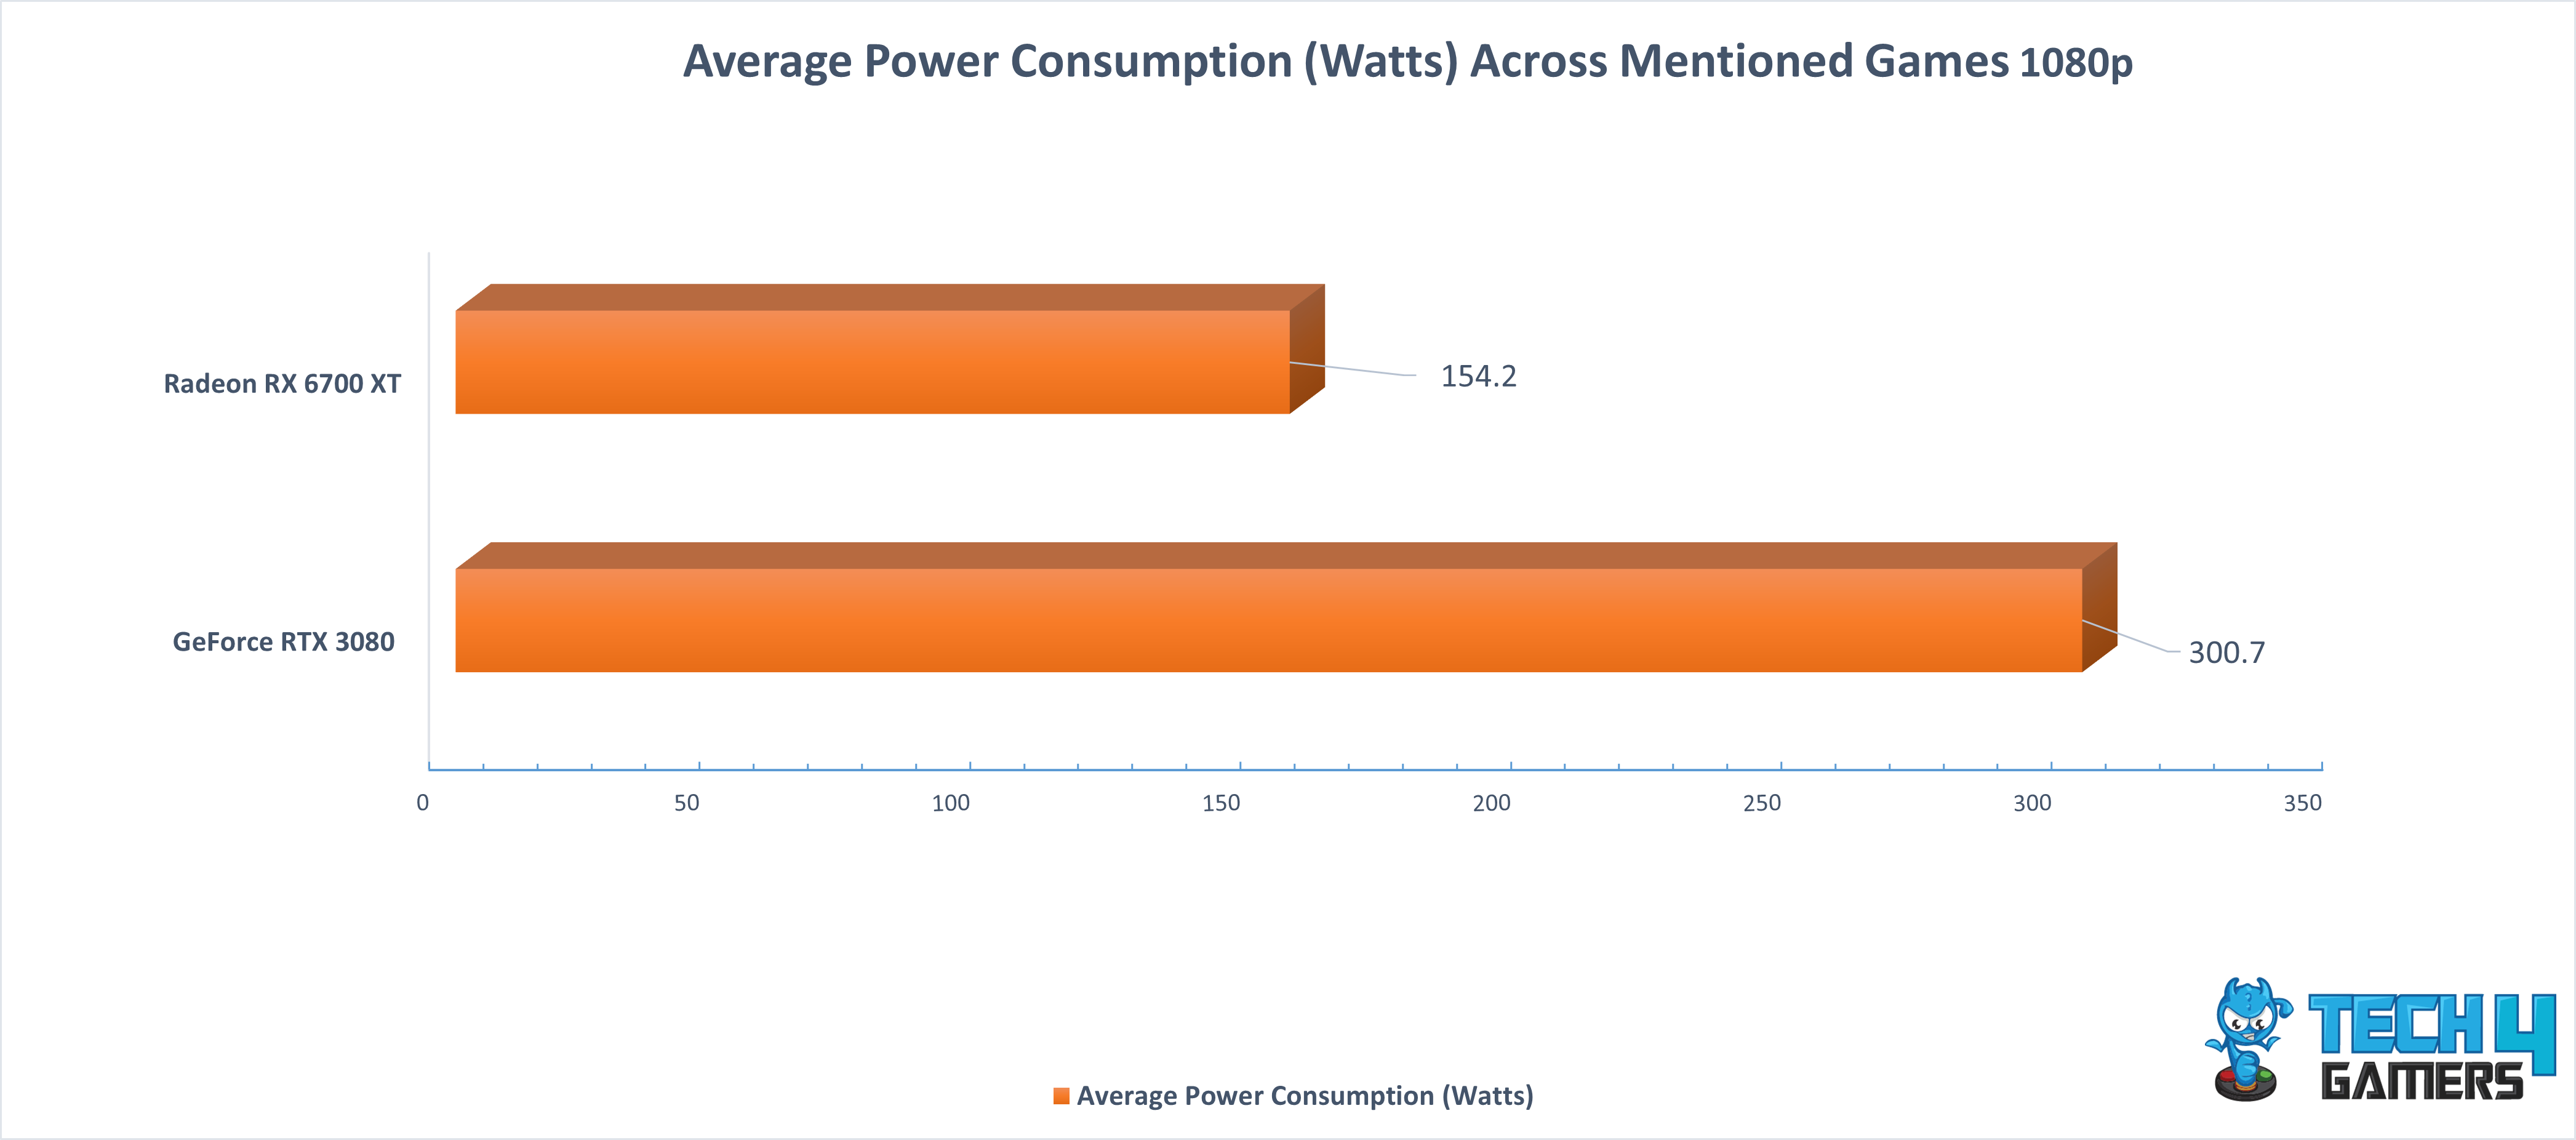 Average Power Consumption Across Mentioned Games